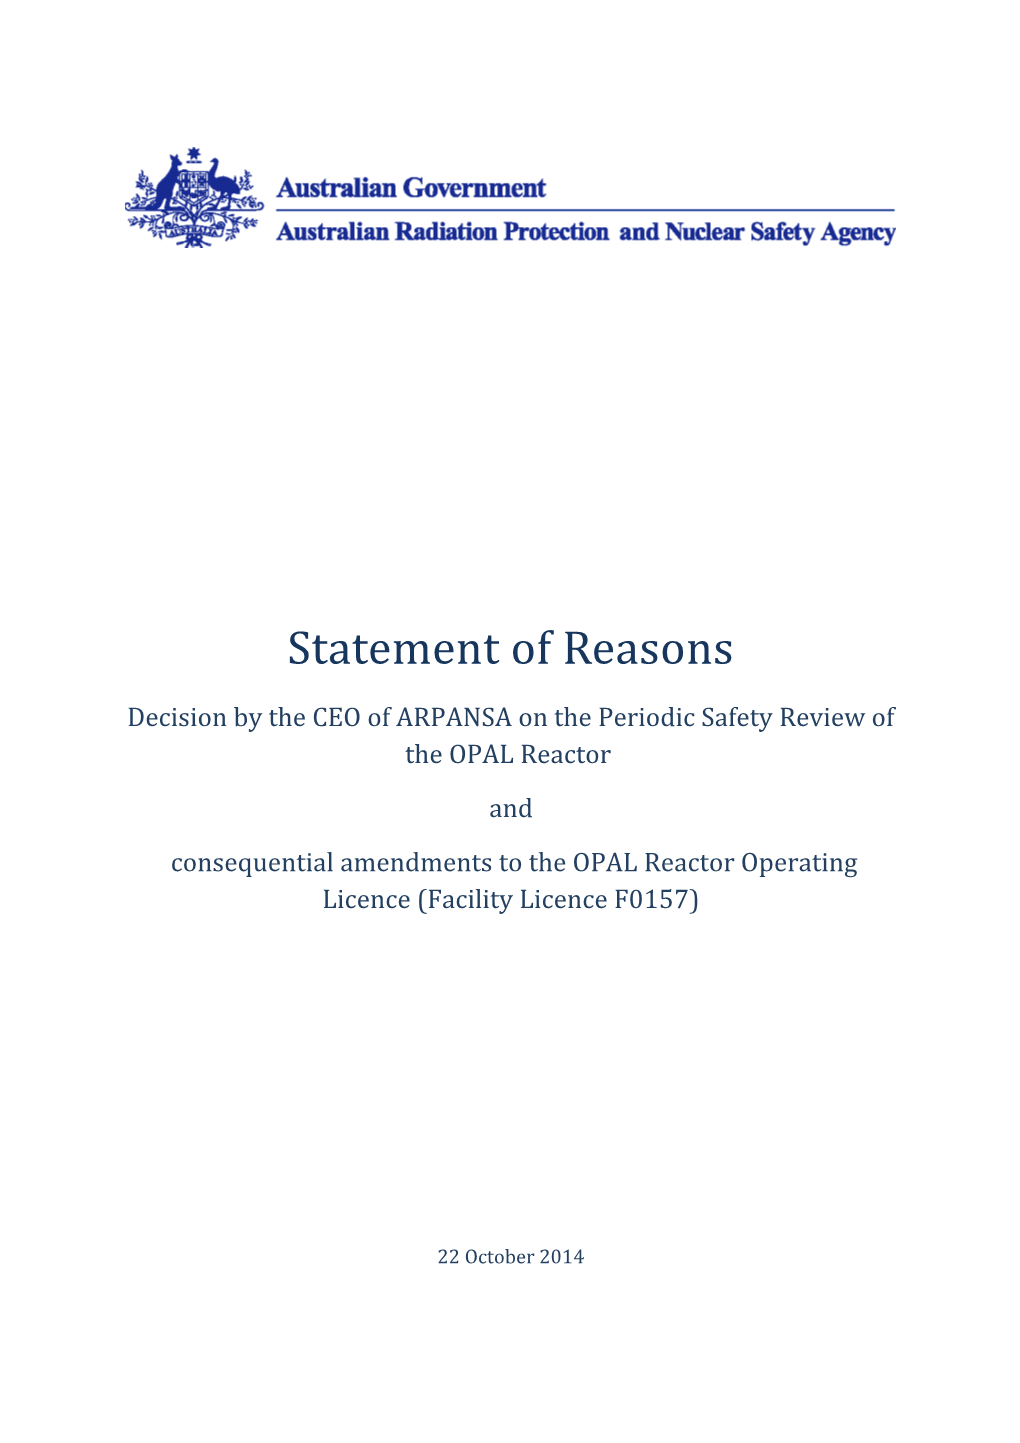 Statement of Reasons - OPAL Reactor PSS and Consequential Amendments to Facility Licence F0157